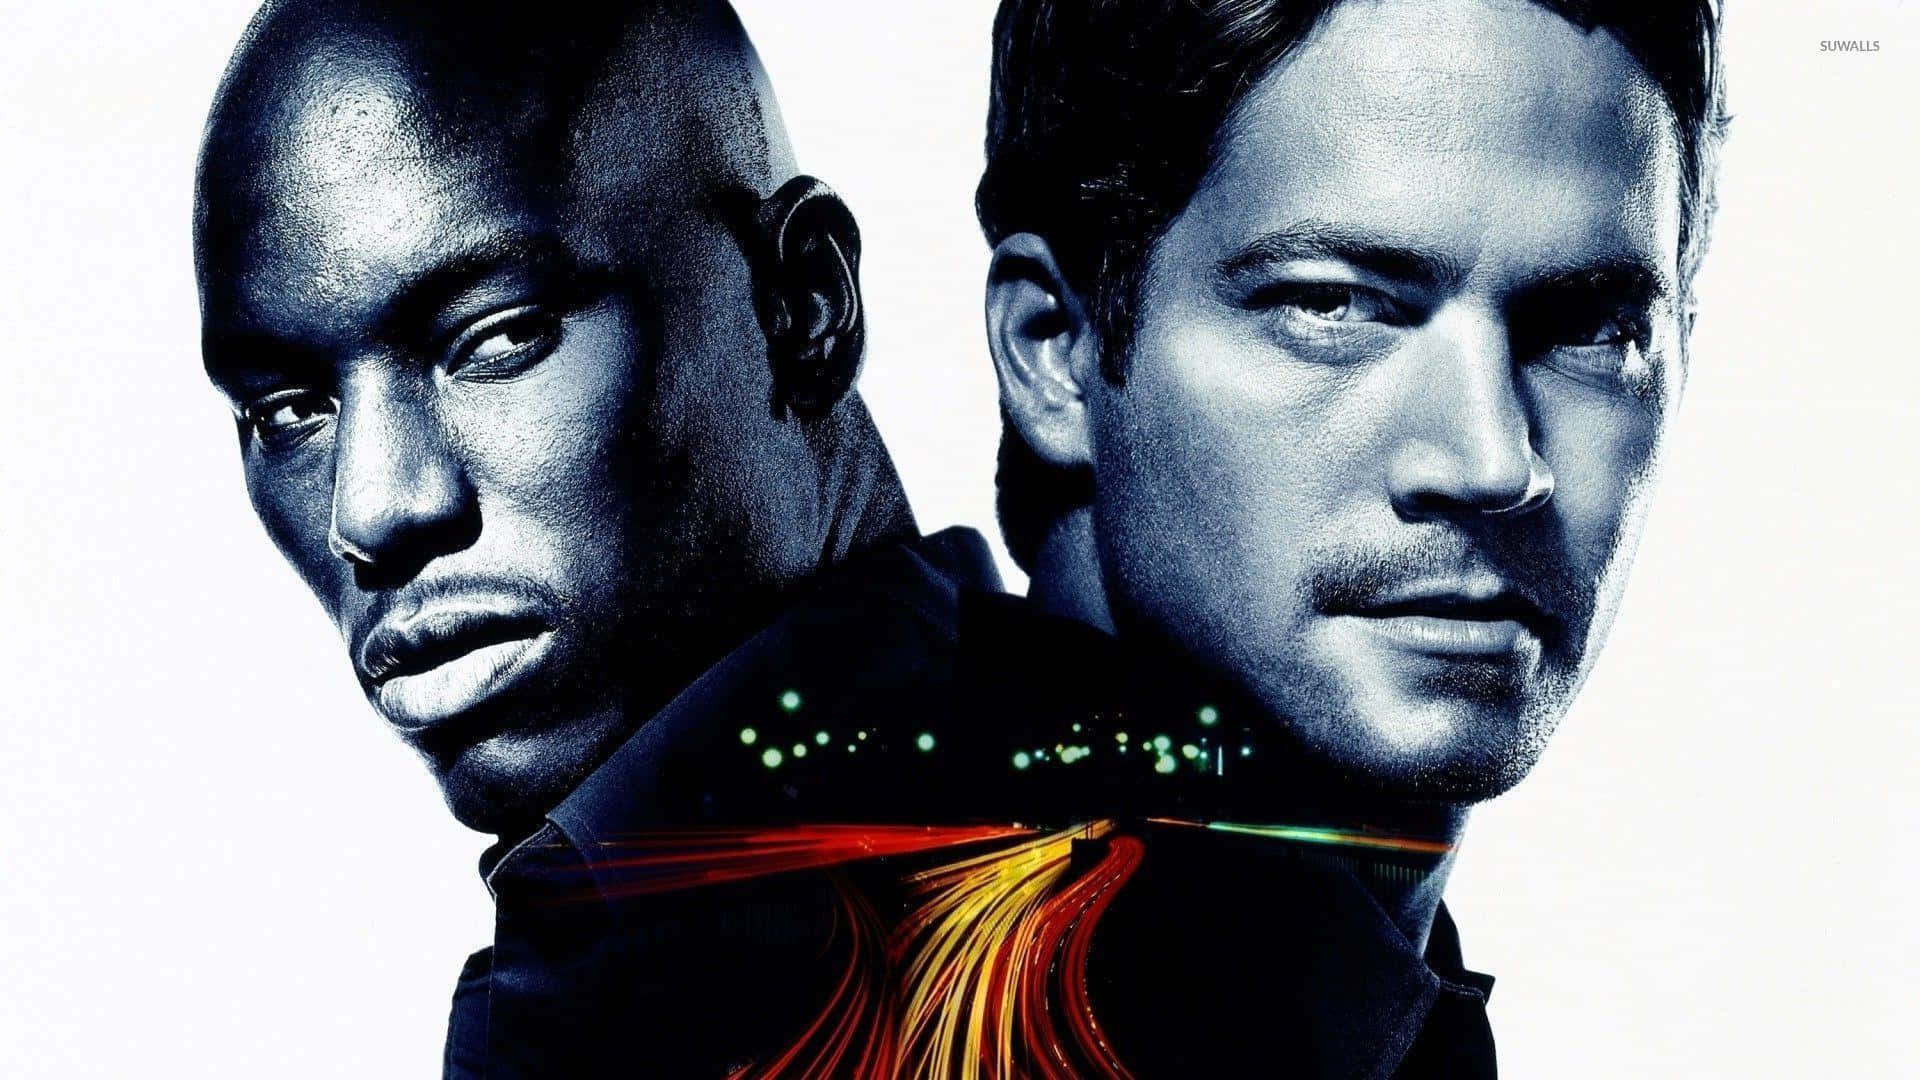 Prepare for the ride of your life with the new Cool Fast And Furious Wallpaper